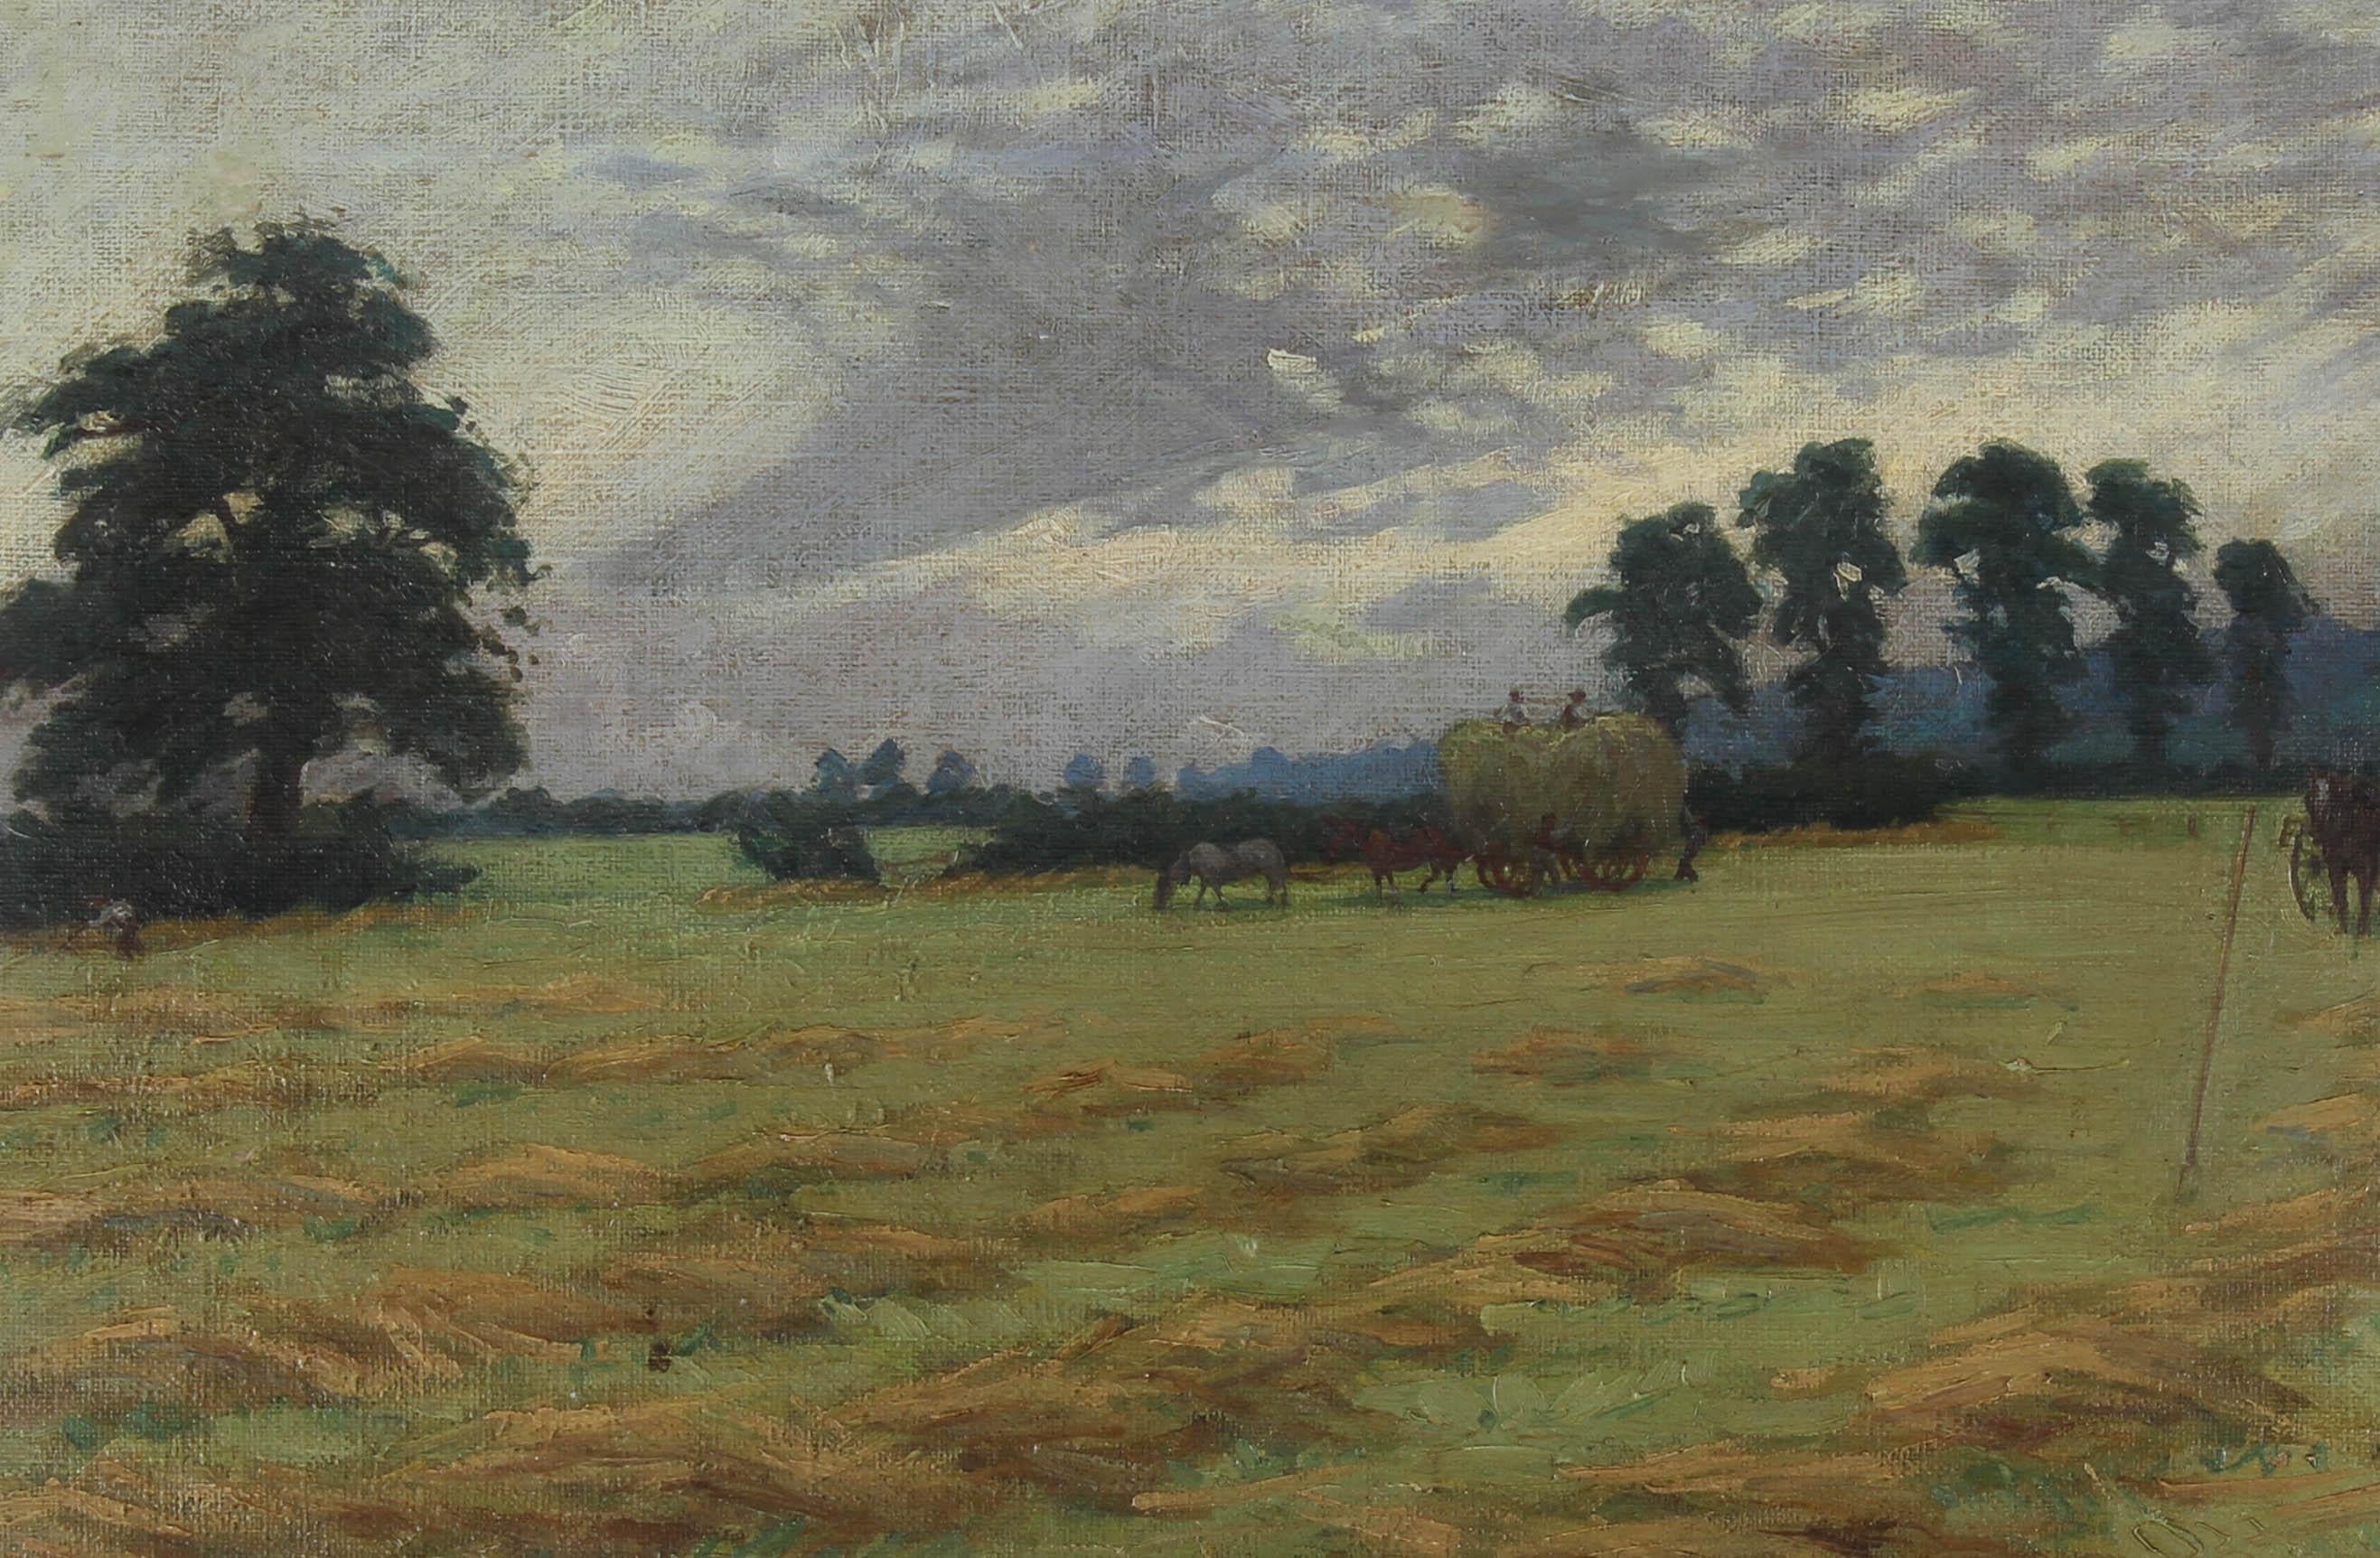 G. E. Hering - Framed 1903 Oil, Haytime in the Meads - Painting by G. E. Glennie